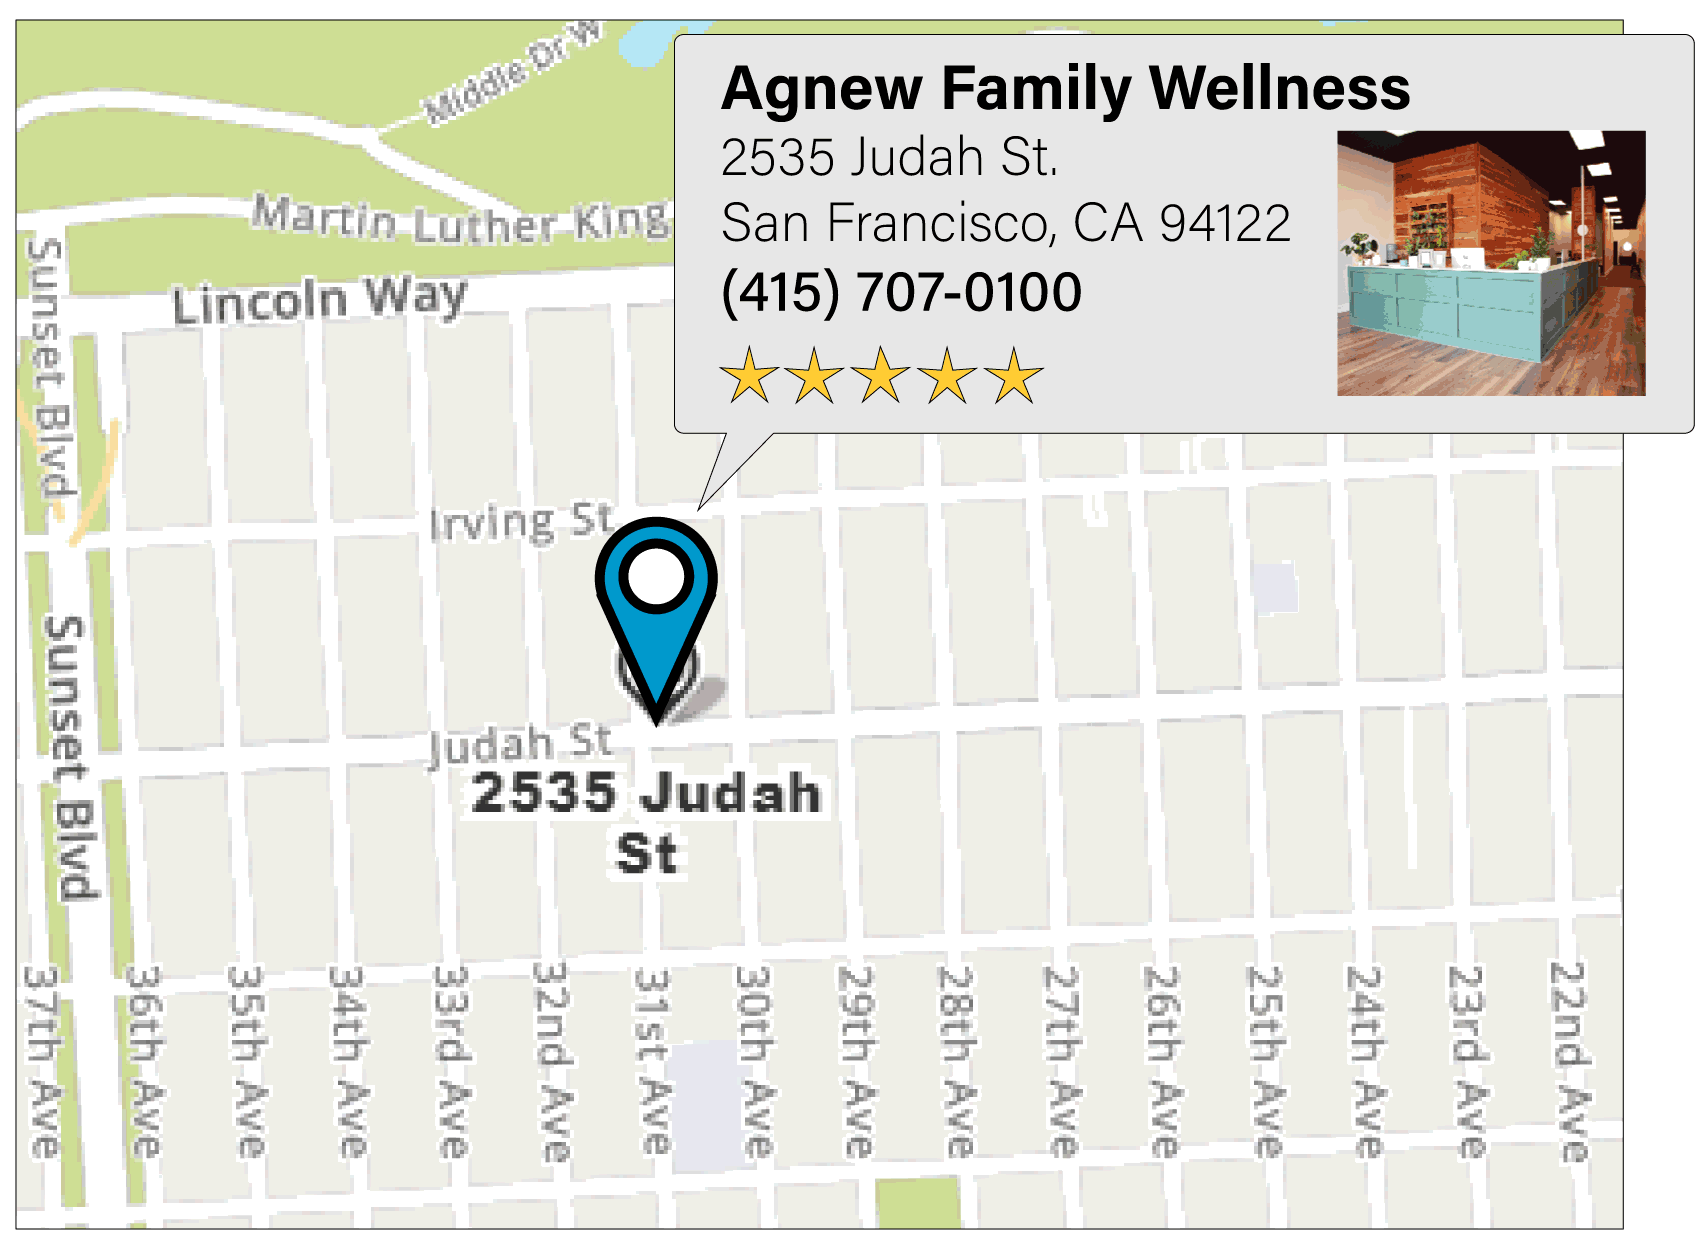 Agnew Family Wellness 's location on google map